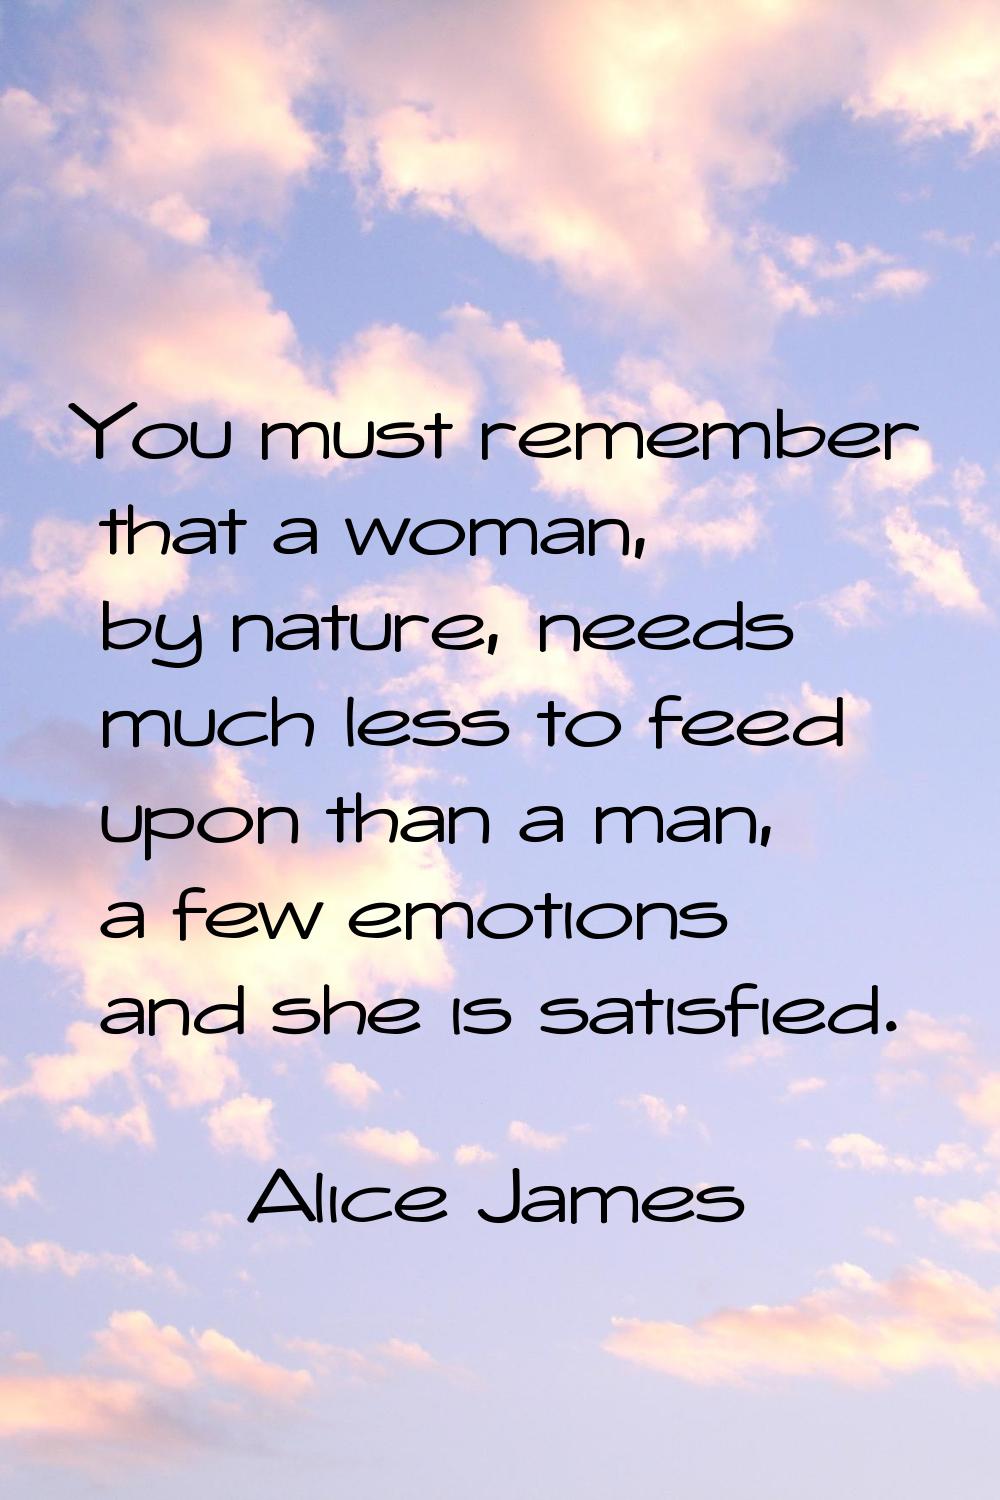 You must remember that a woman, by nature, needs much less to feed upon than a man, a few emotions 